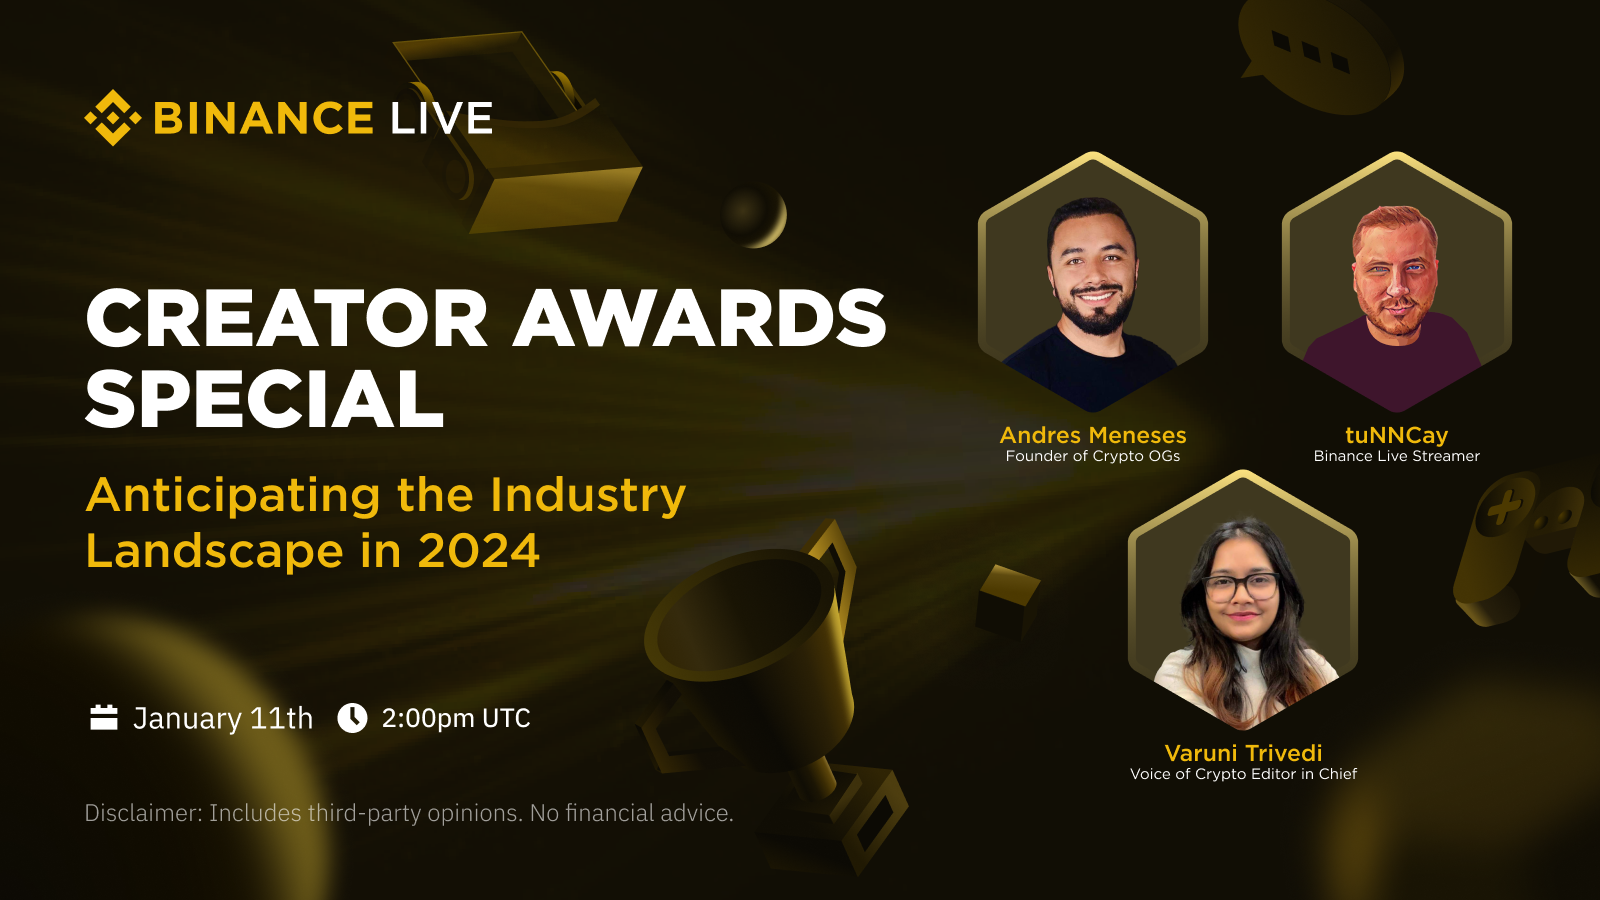 Binance Square Awards: Anticipating the Industry Landscape in 2024